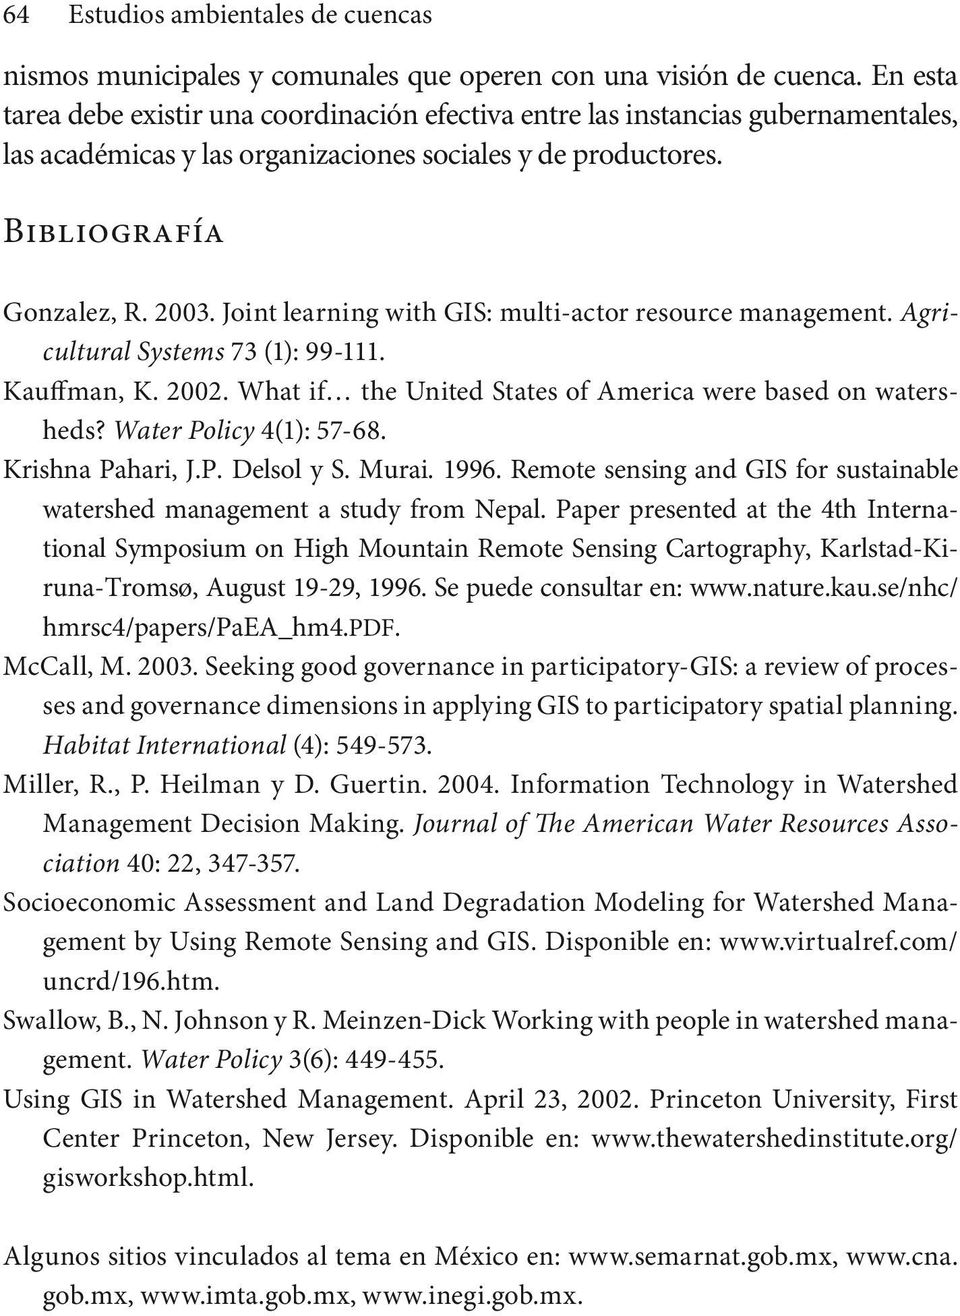 Joint learning with GIS: multi-actor resource management. Agricultural Systems 73 (1): 99-111. Kauffman, K. 2002. What if the United States of America were based on watersheds?